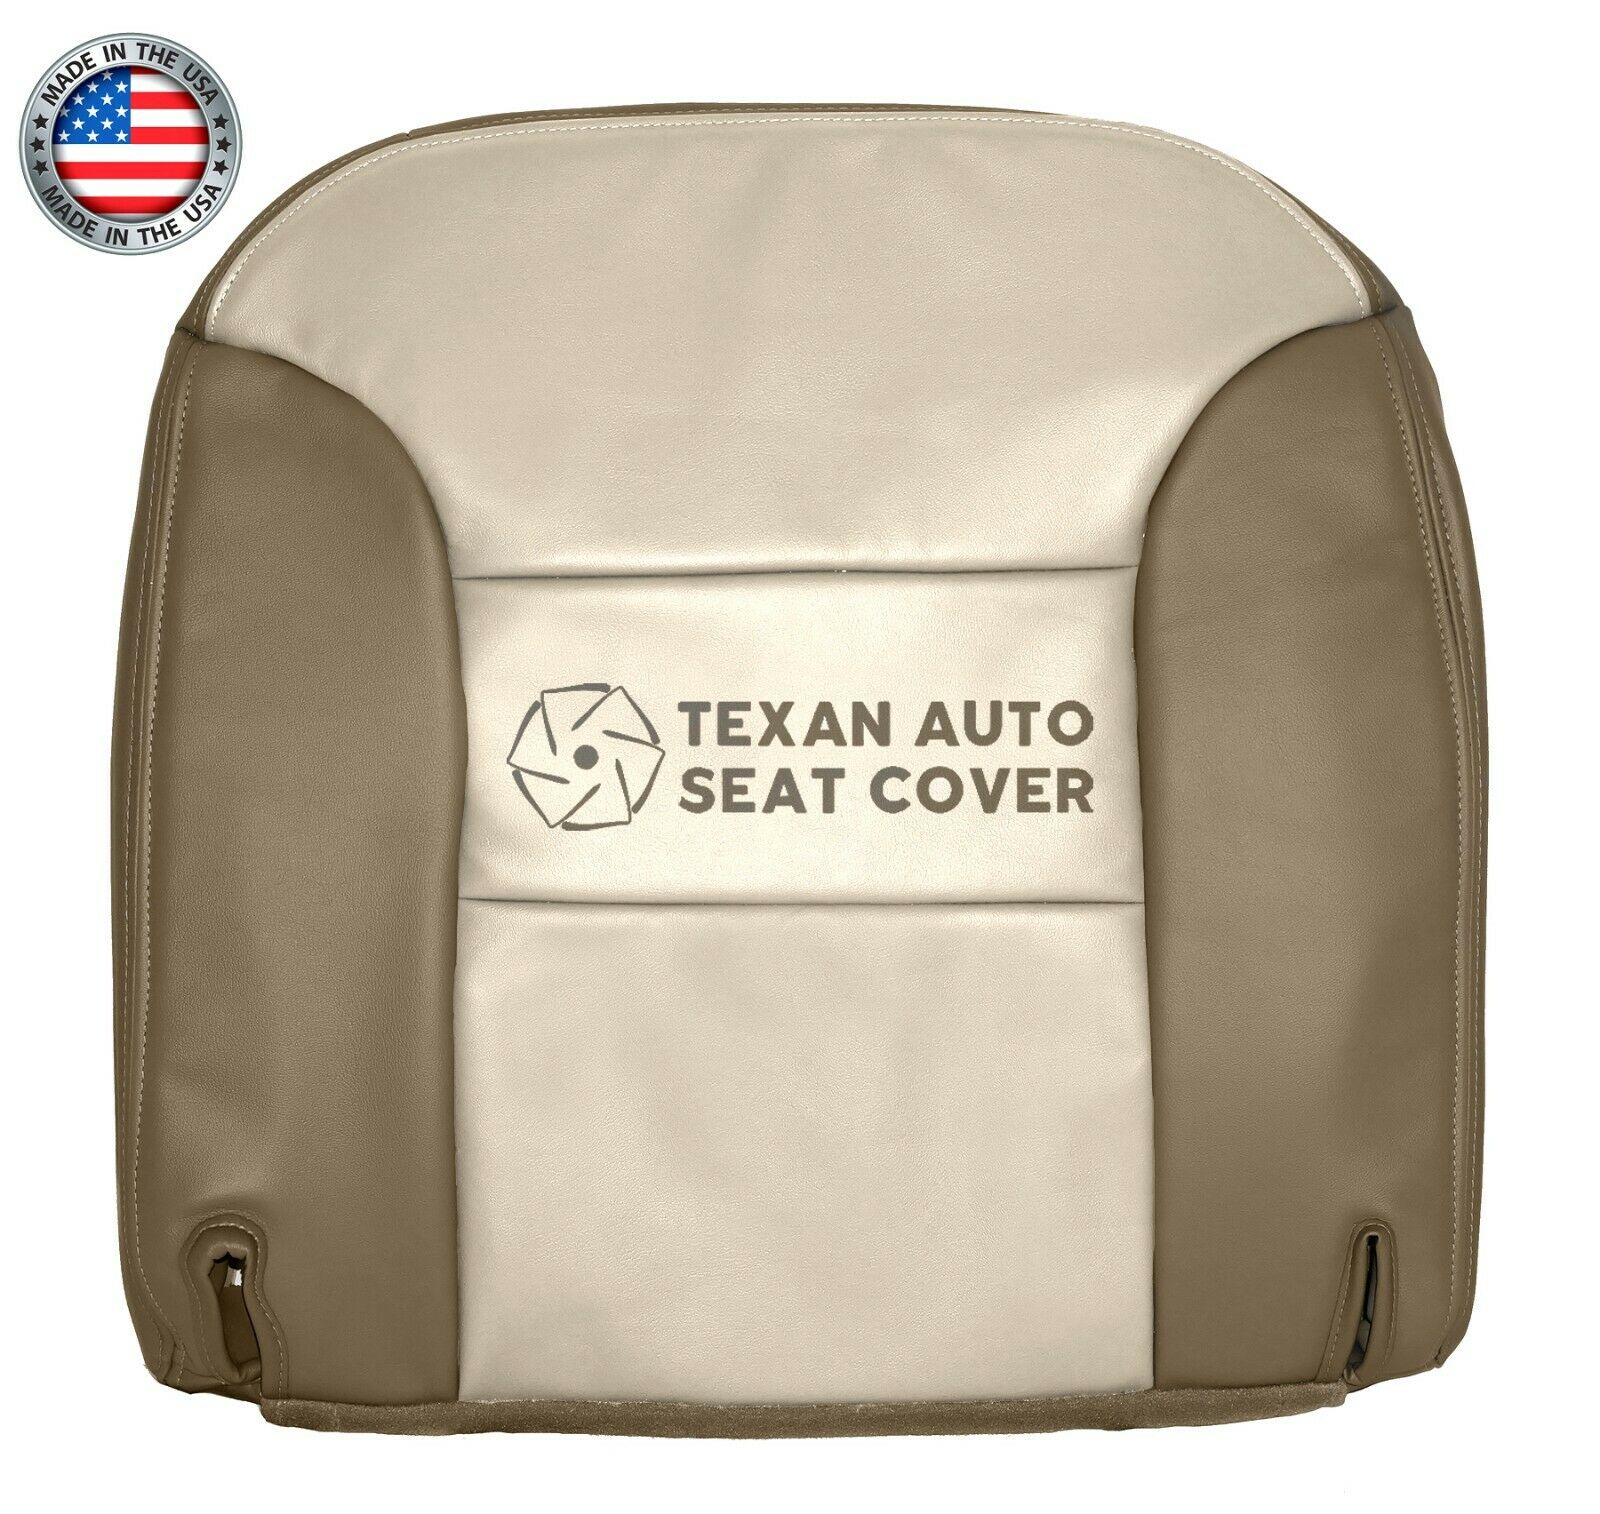 1999, 2000 Chevy Tahoe Limited, Z71 Passenger Side Bottom Synthetic Leather Seat Cover 2Tone Tan